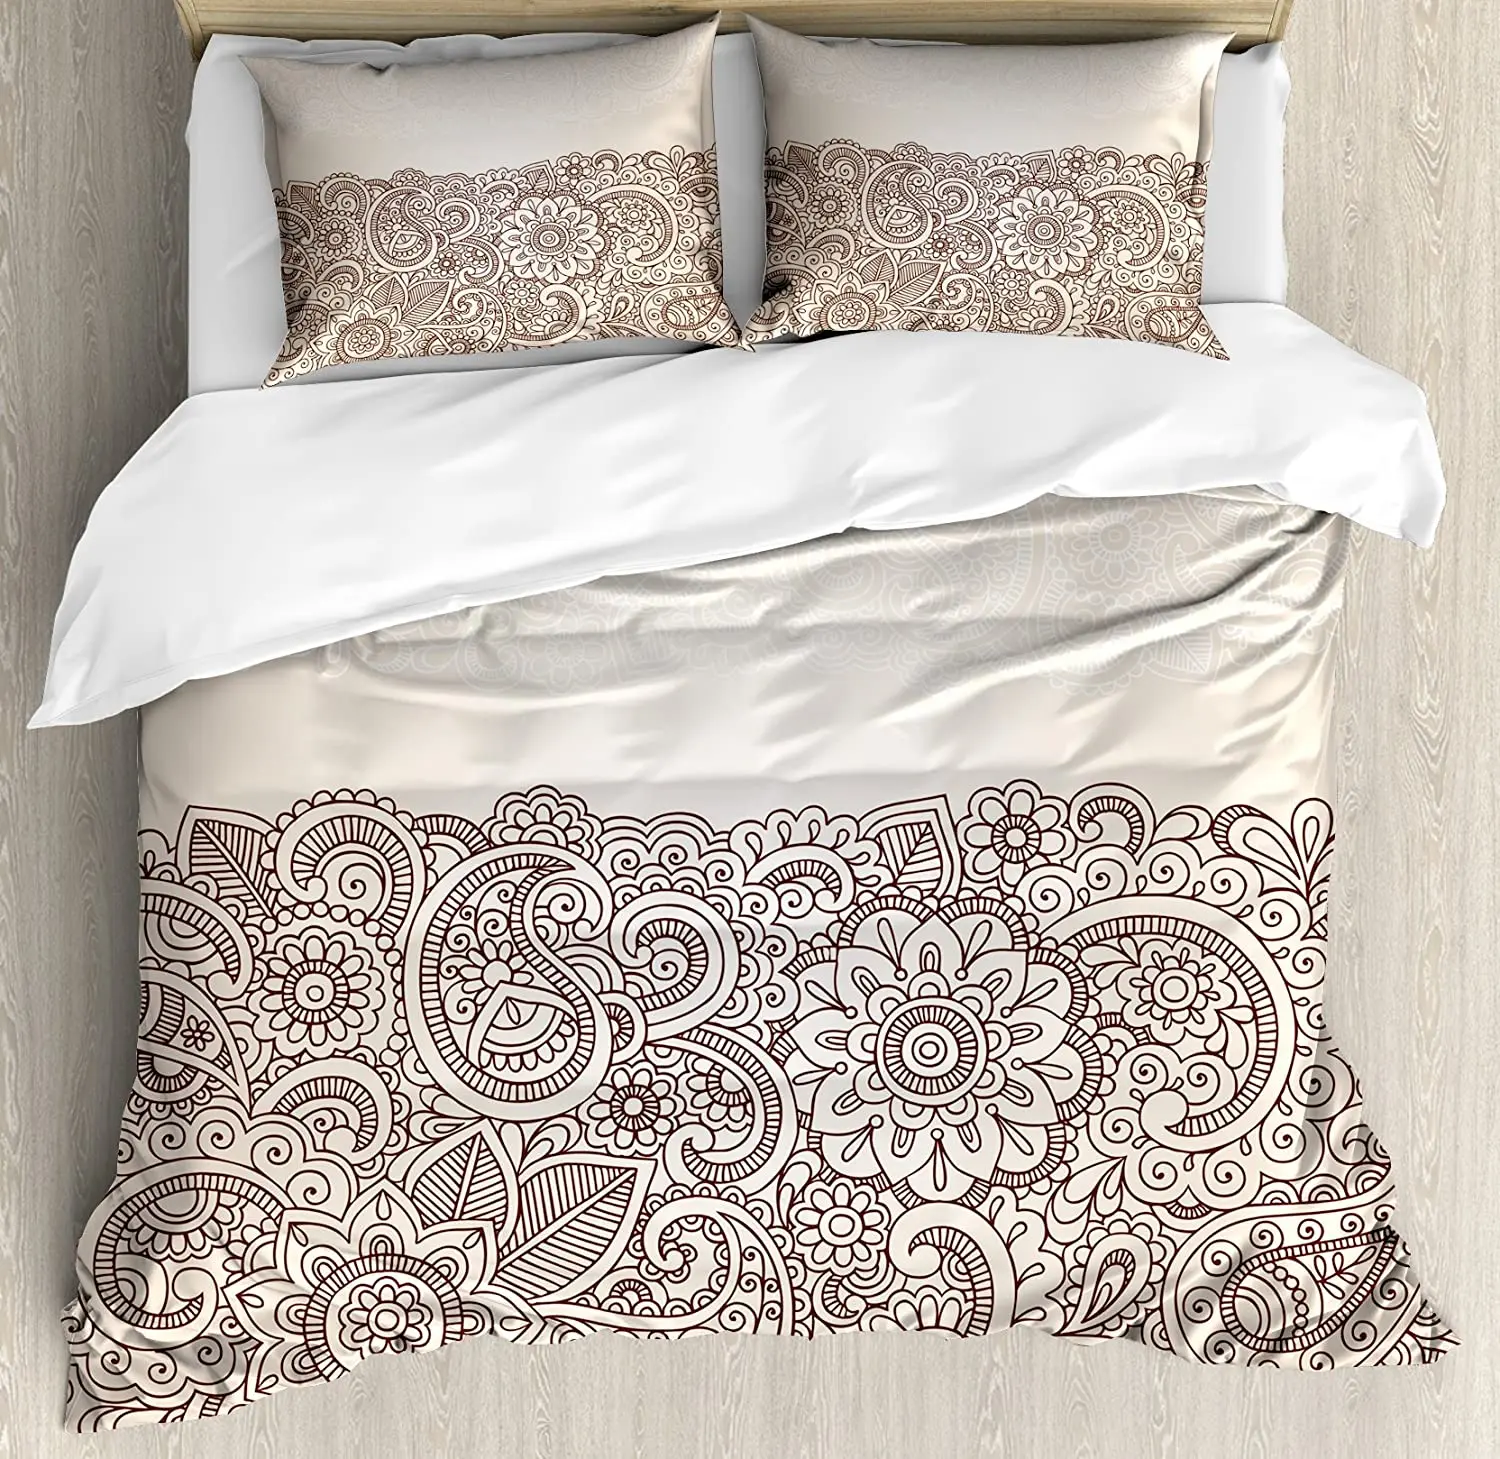 

Henna Bedding Set For Bedroom Bed Home Complex Design with Mandala and Paisley Nature Ins Duvet Cover Quilt Cover And Pillowcase